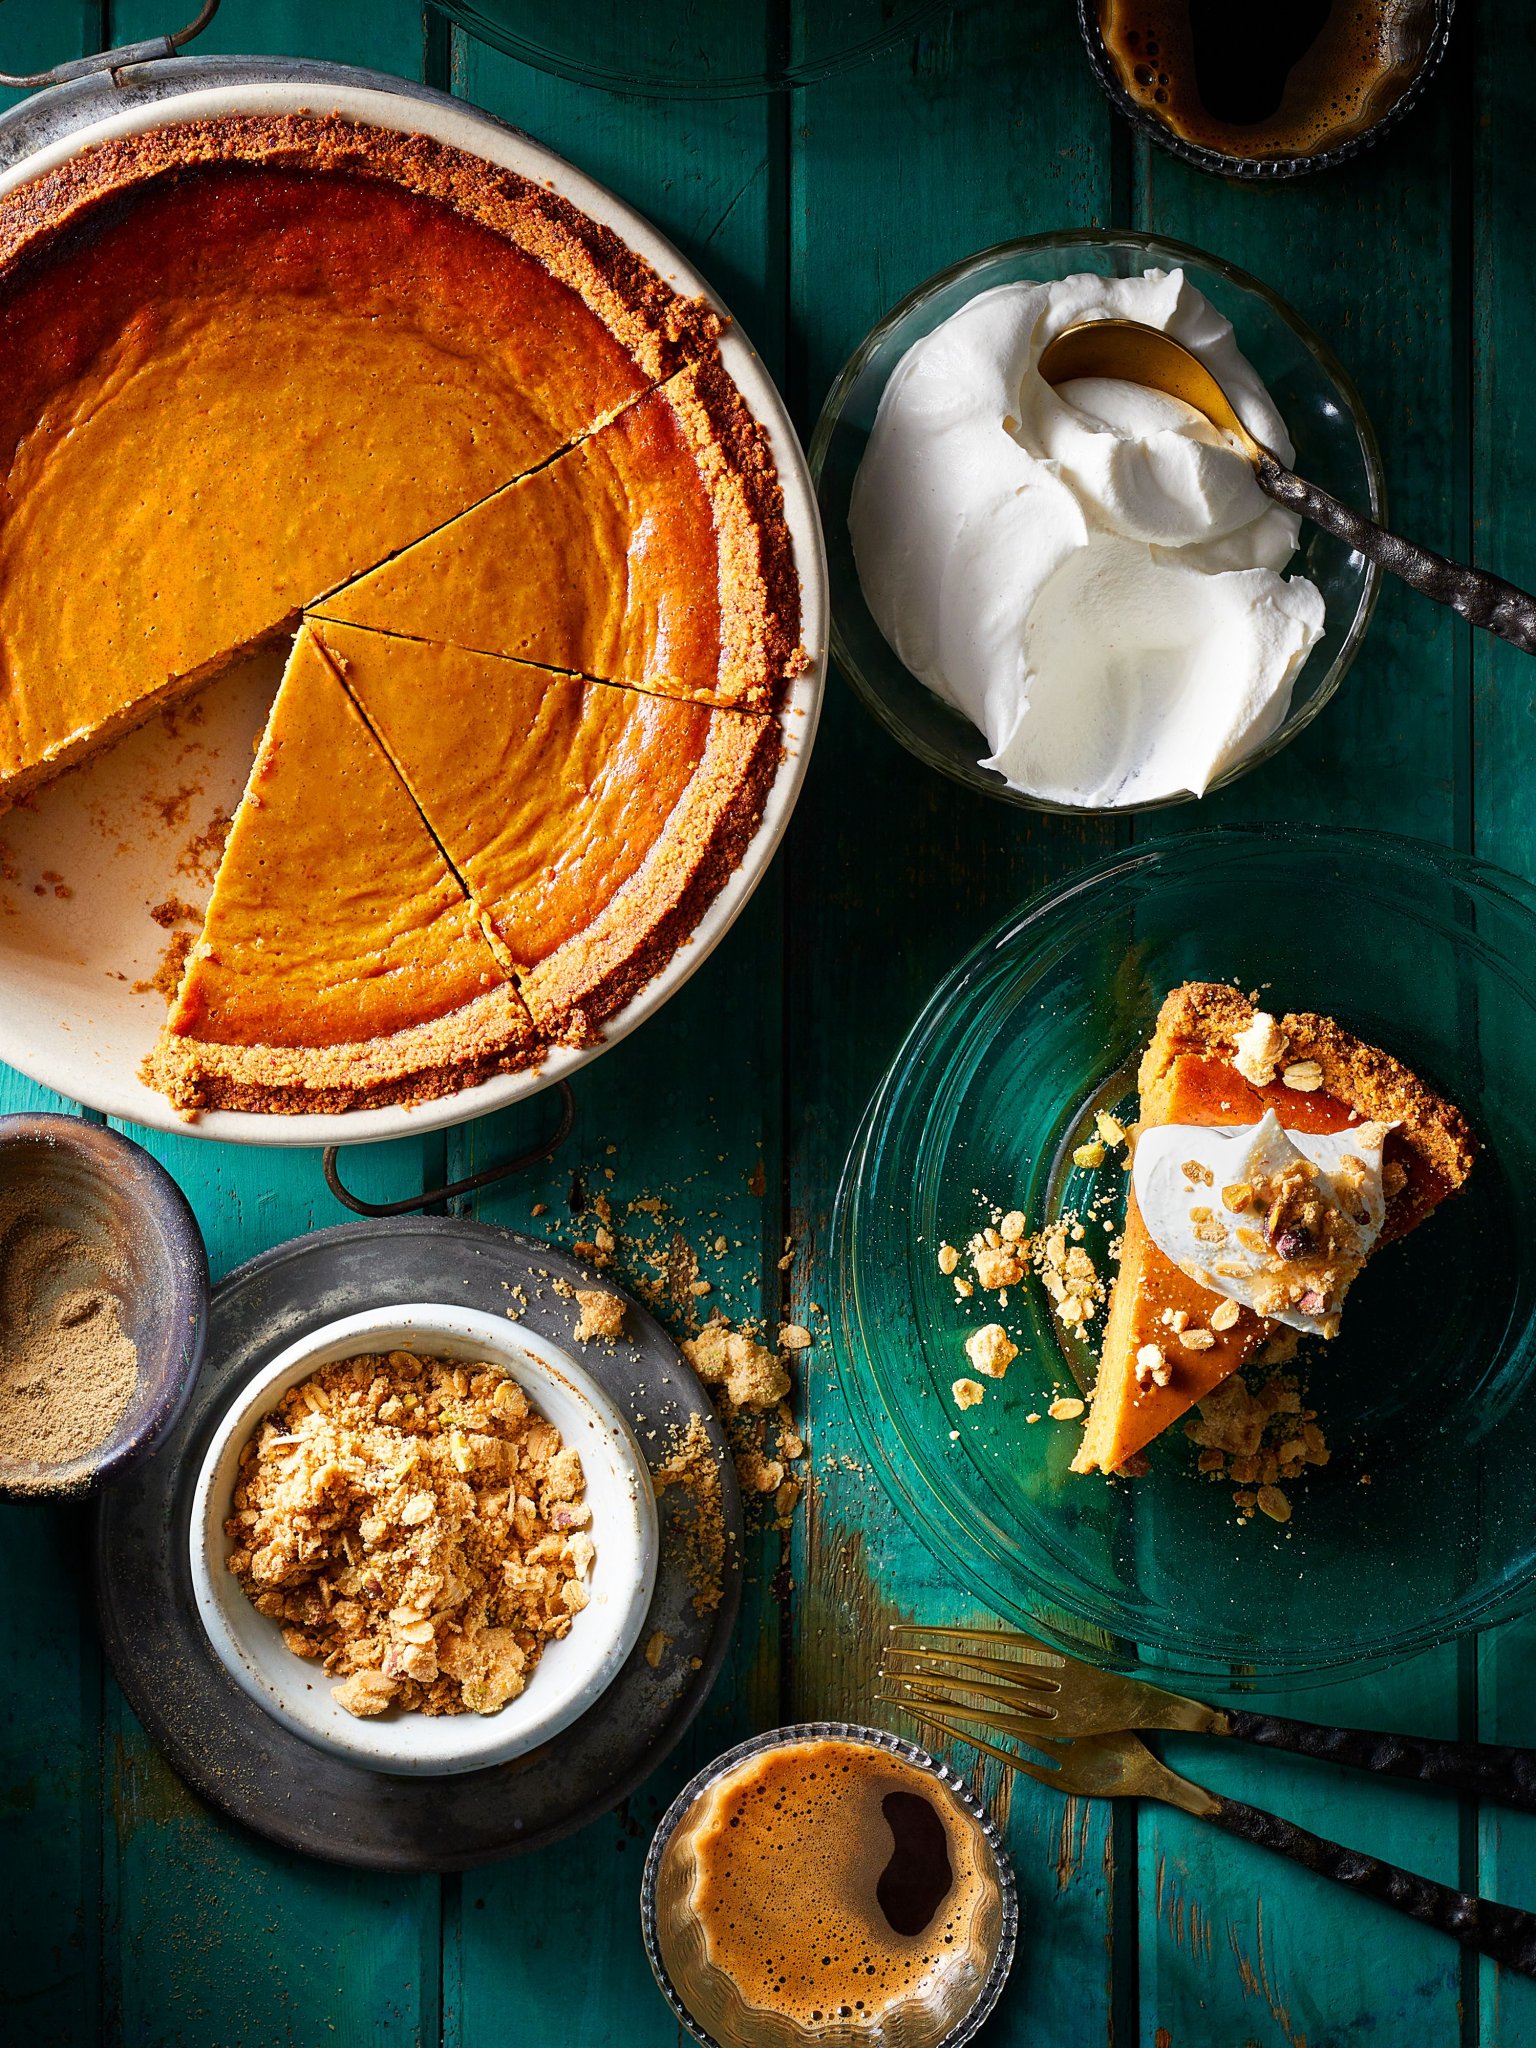 27 Pumpkin Pie Recipes to Make for Thanksgiving